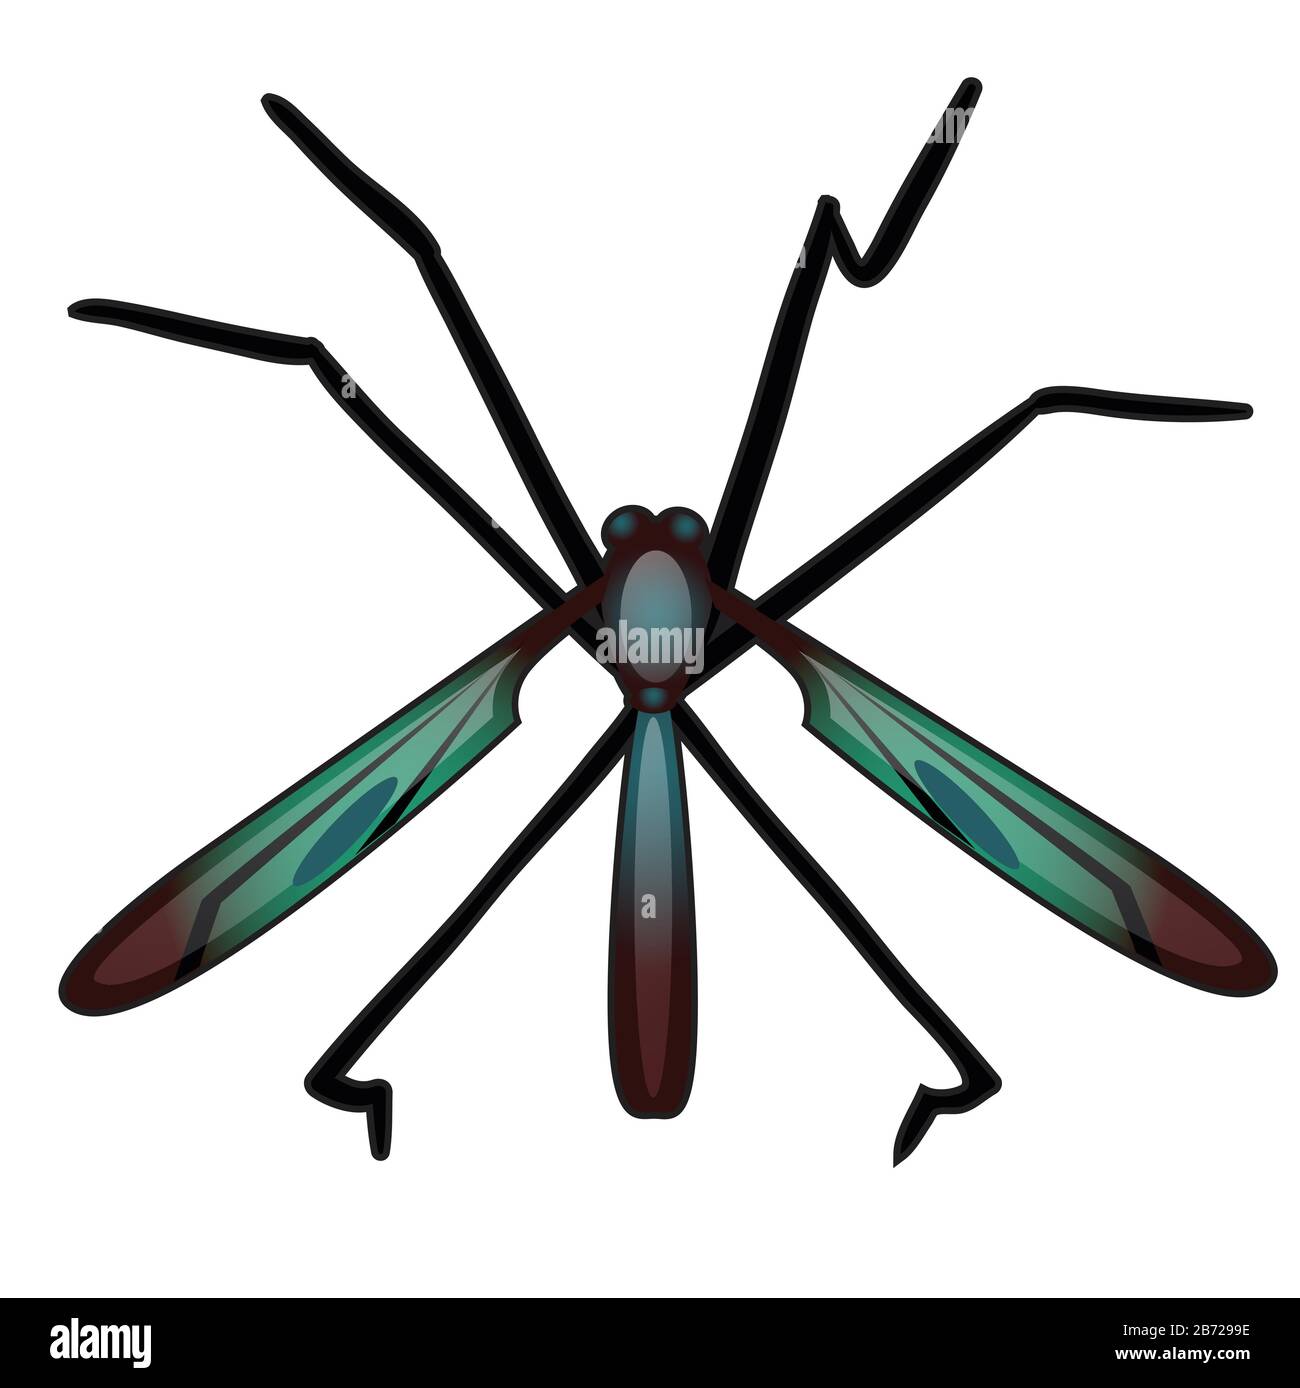 Winged bloodsucking insect isolated on white background. Vector cartoon close-up illustration. Stock Vector